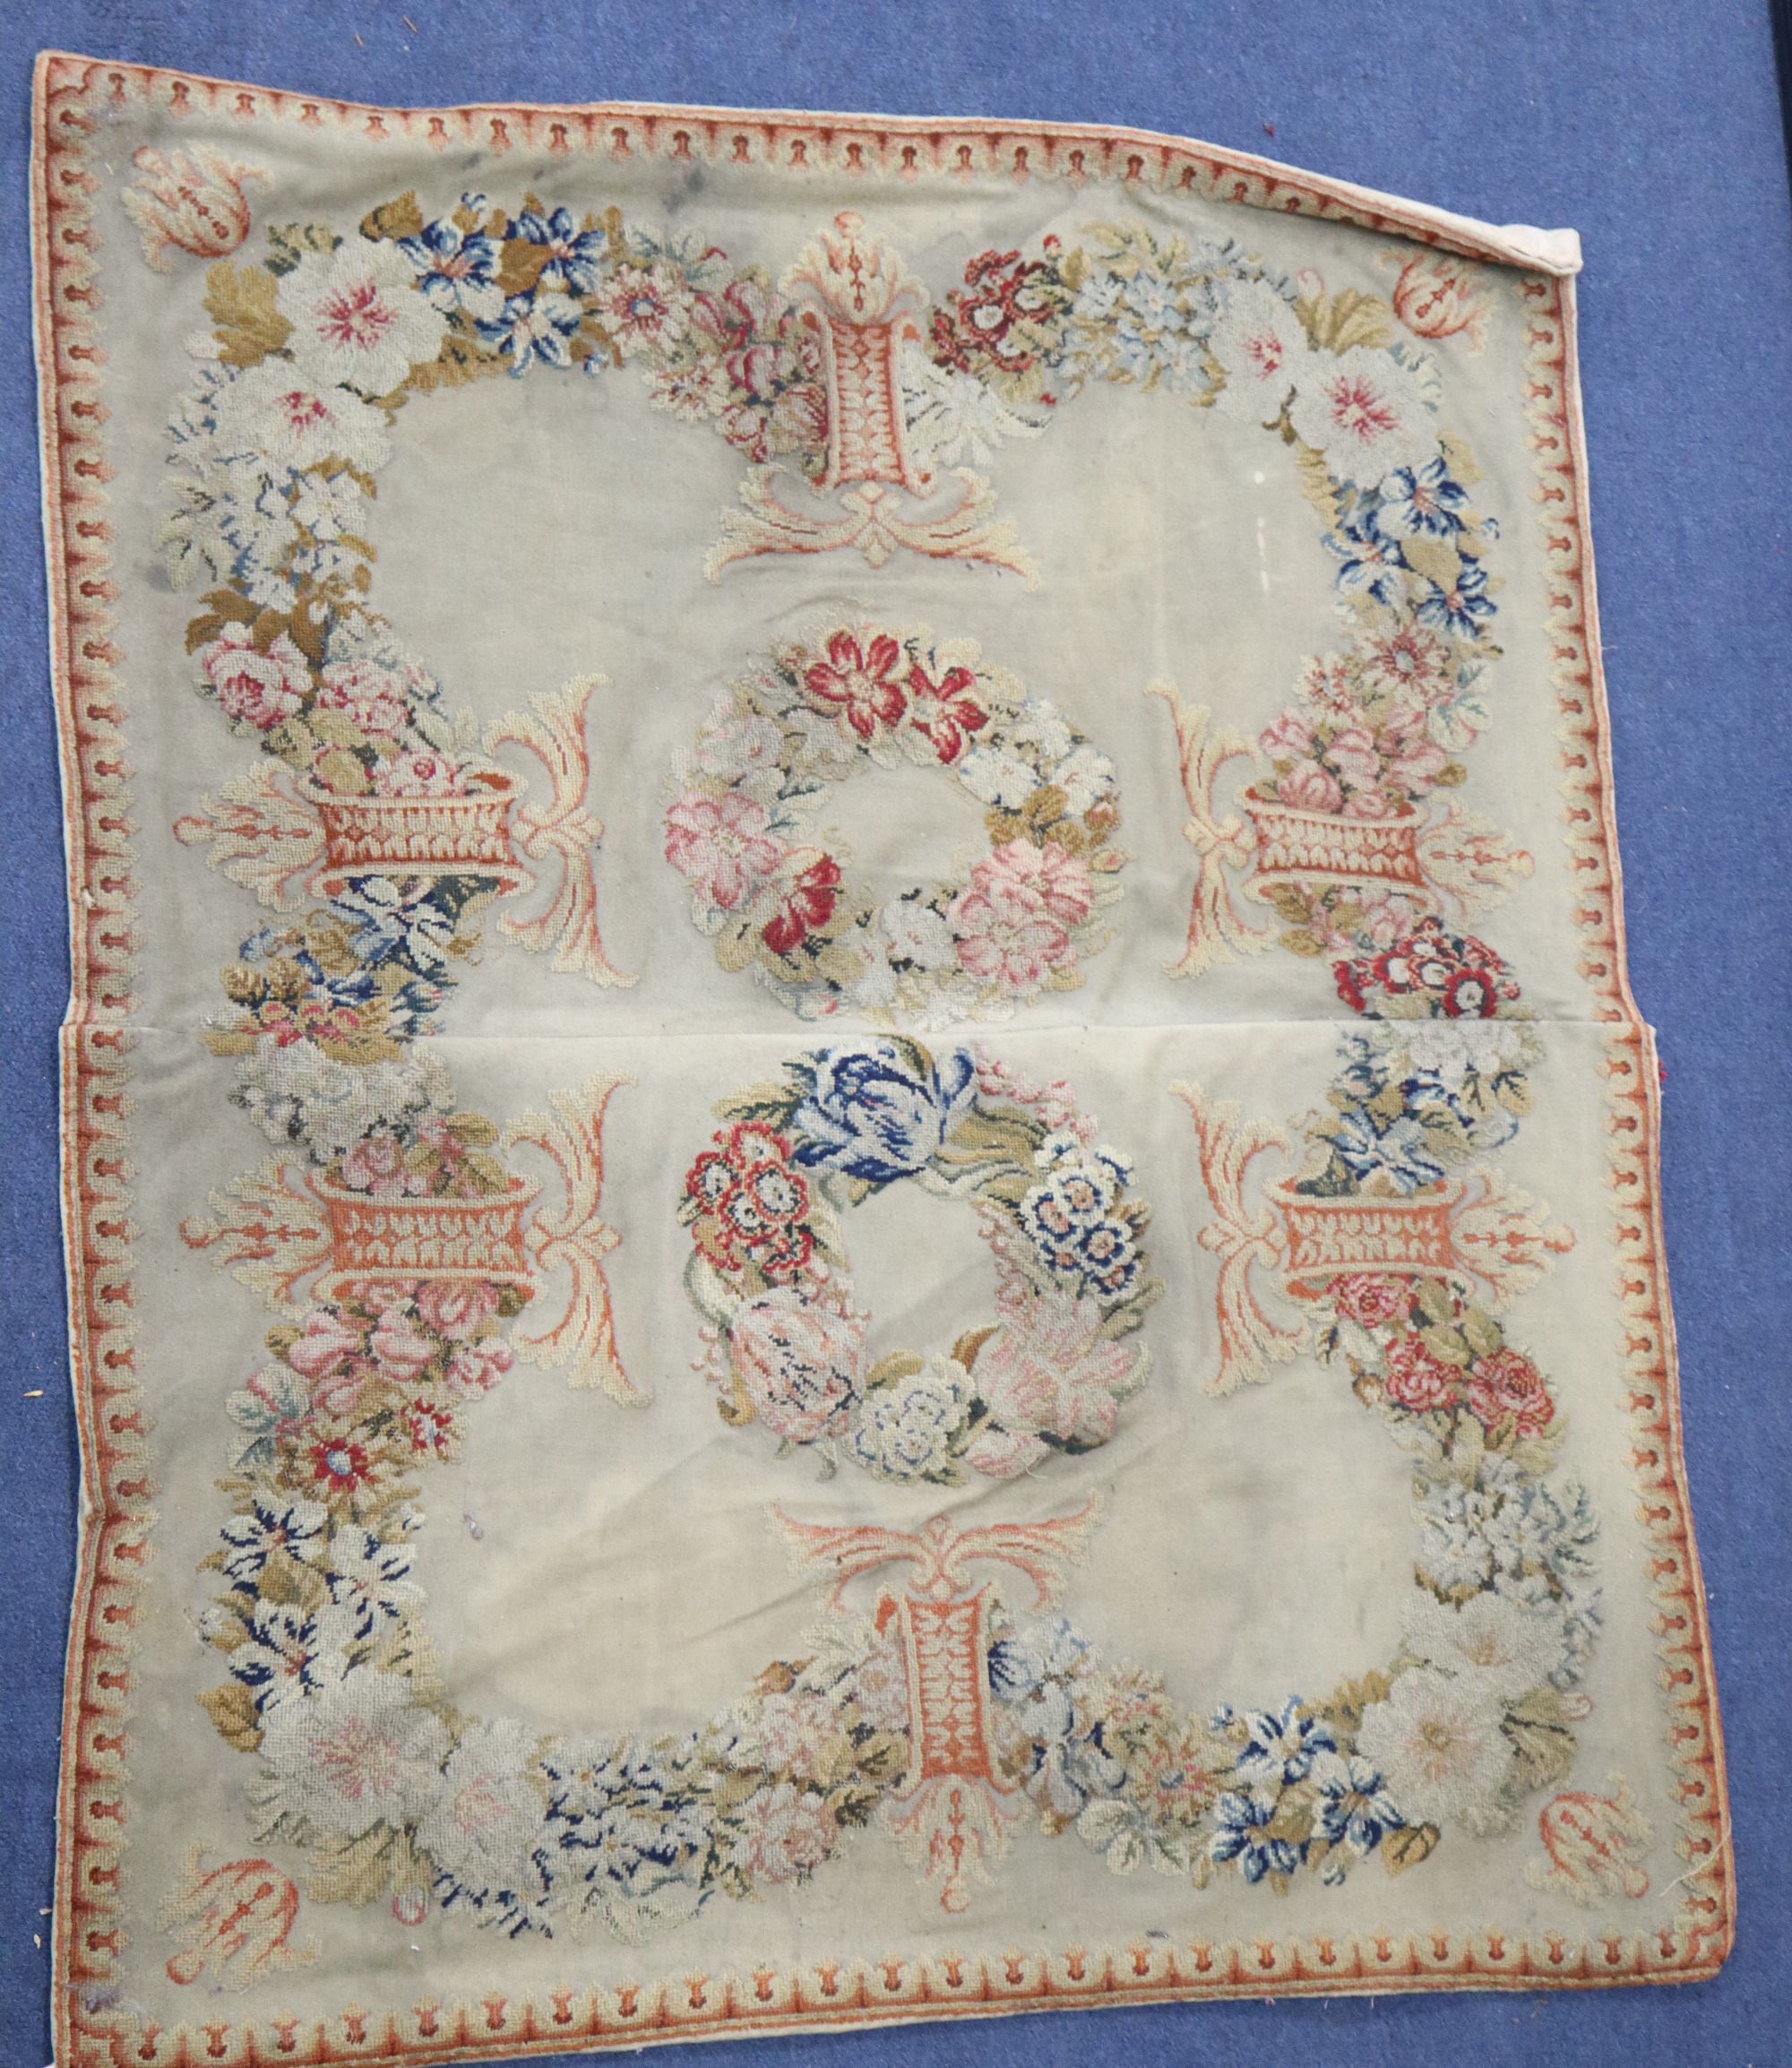 An Antique French needlepoint panel, decorated with a continuous band of flowers and two central wreaths, 98 x 85cm